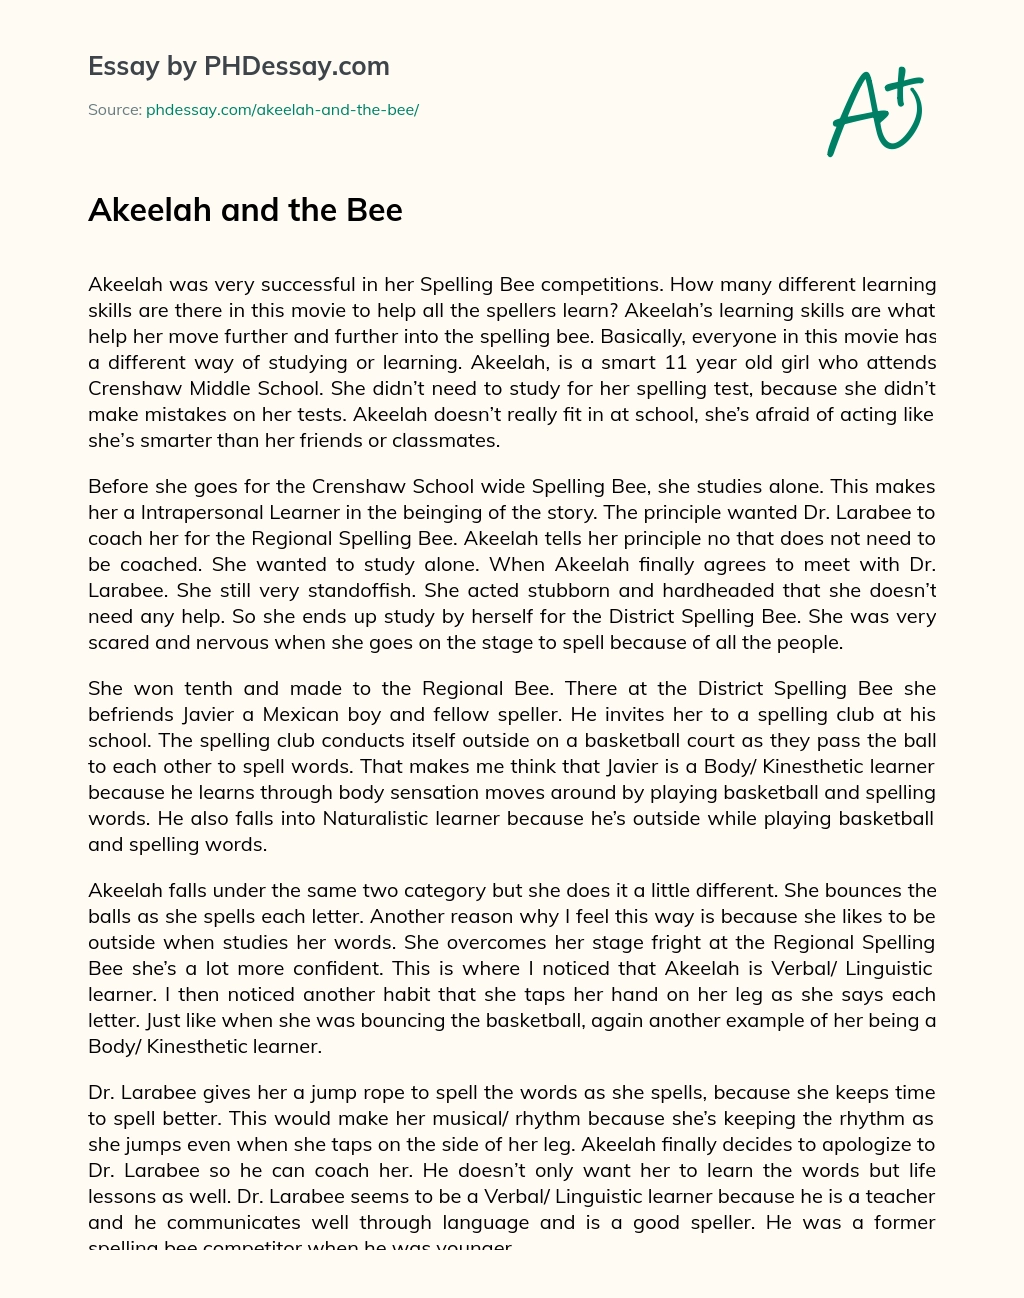 Akeelah and the Bee essay